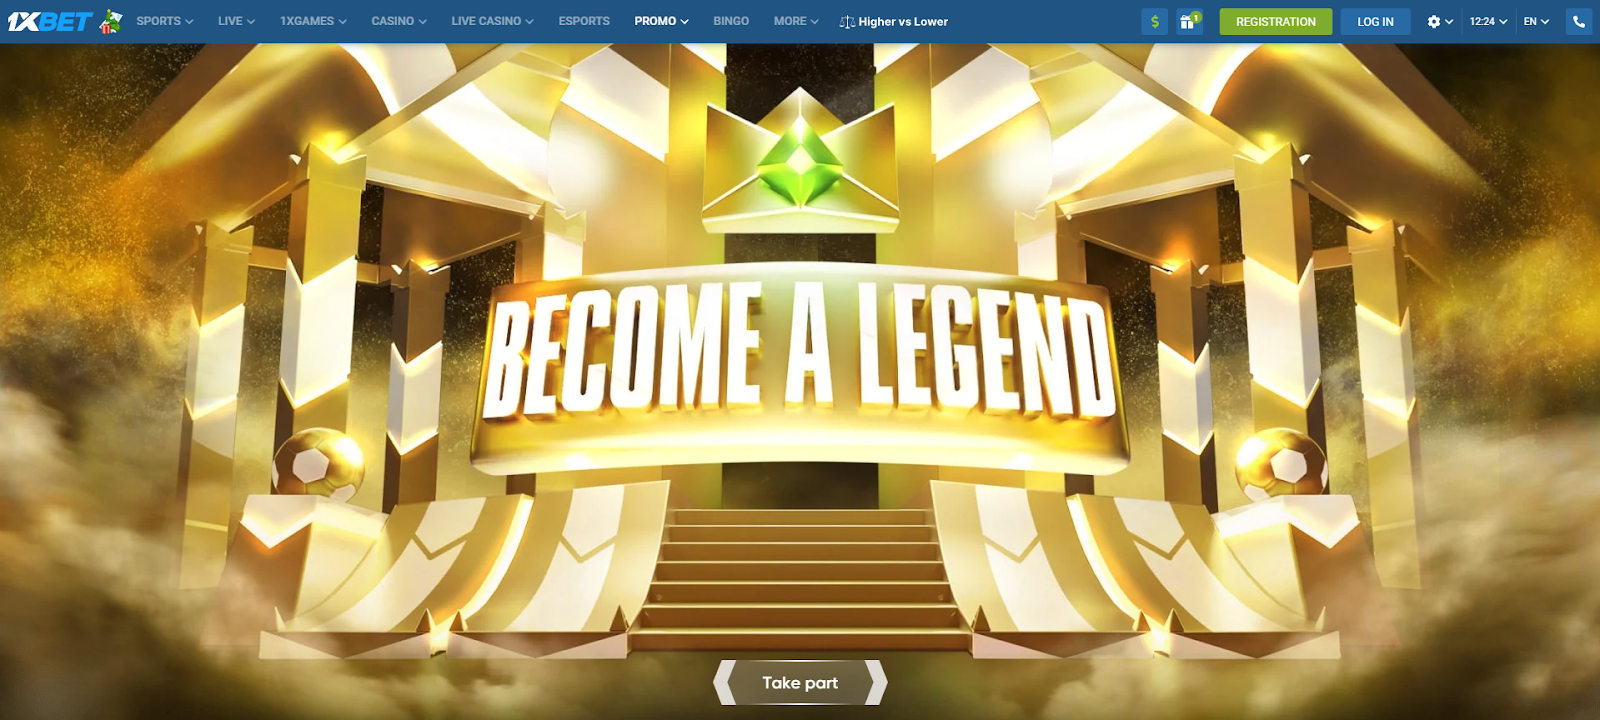 Become a Legend Promotion at 1xBet Singapore